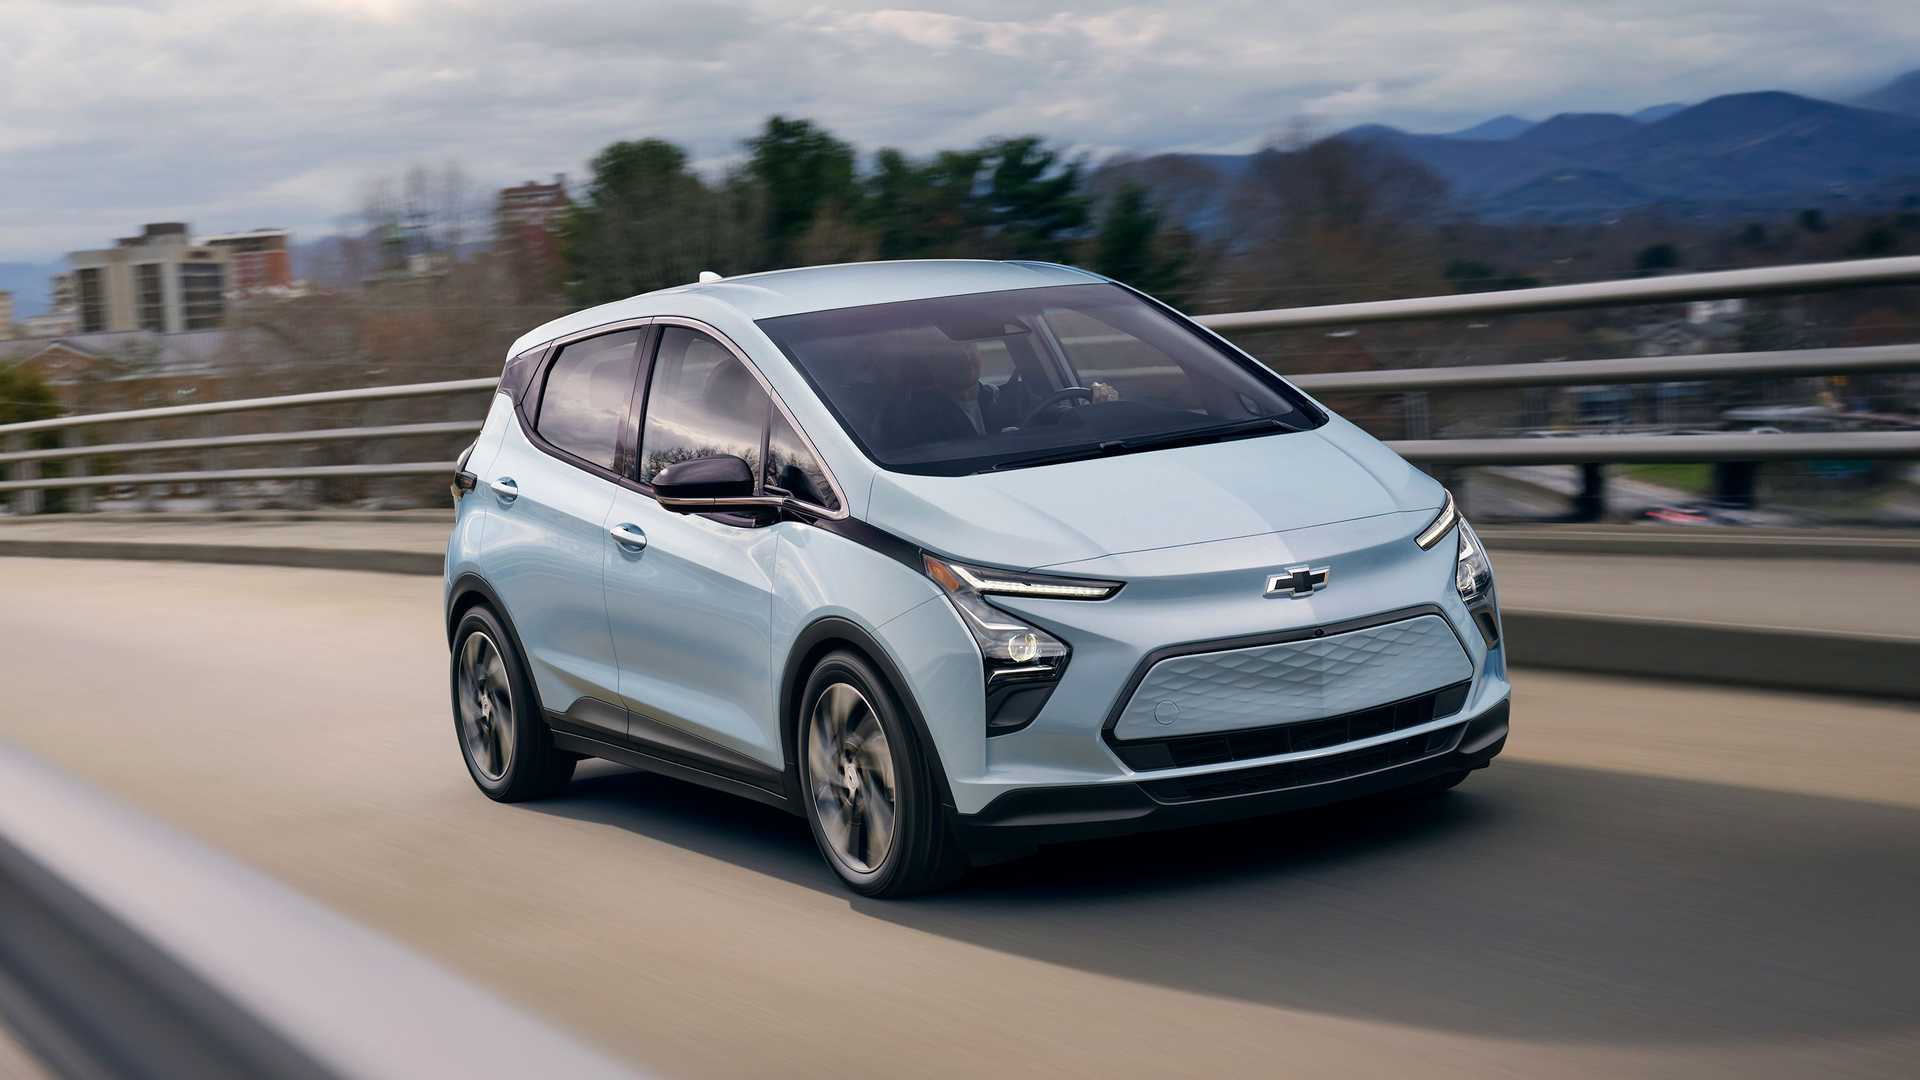 2023 Chevy Bolt EV Price in the United States